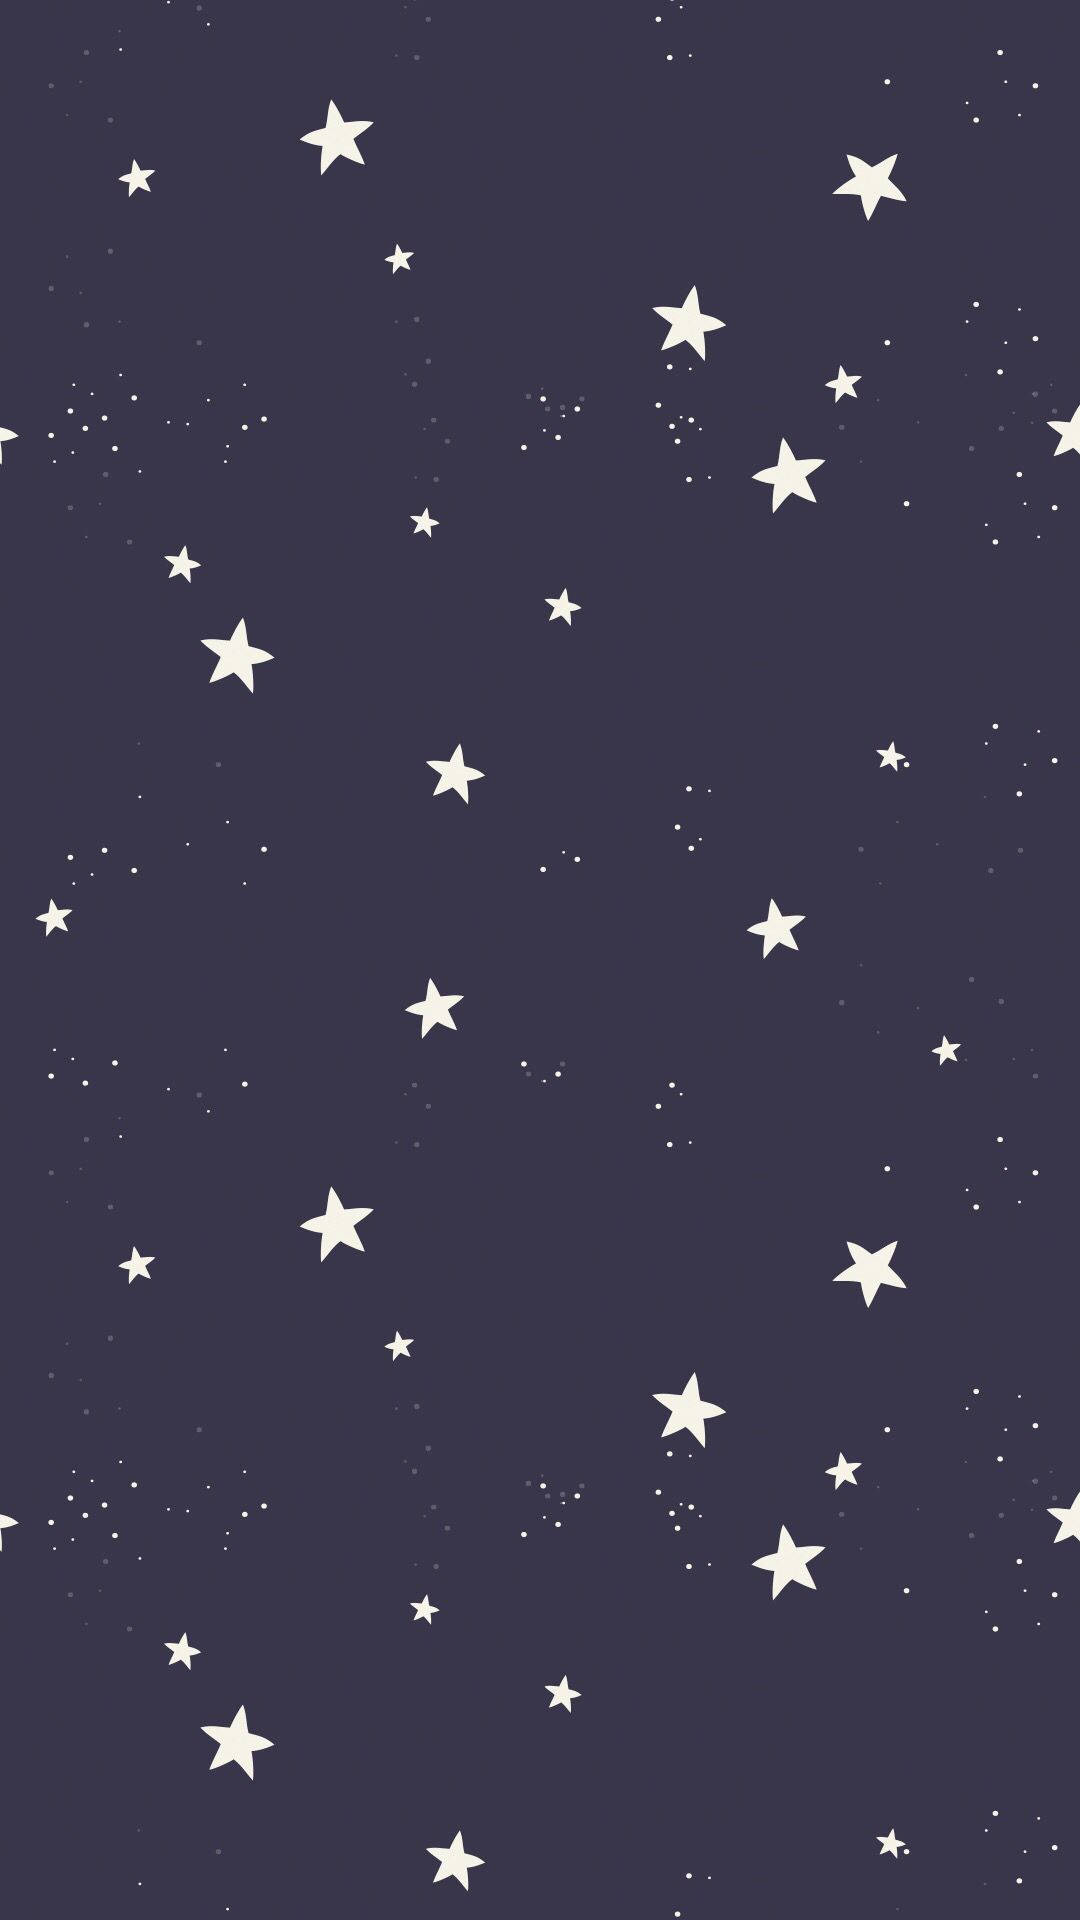 Colorful Stars Abound in This Simple Pattern Wallpaper